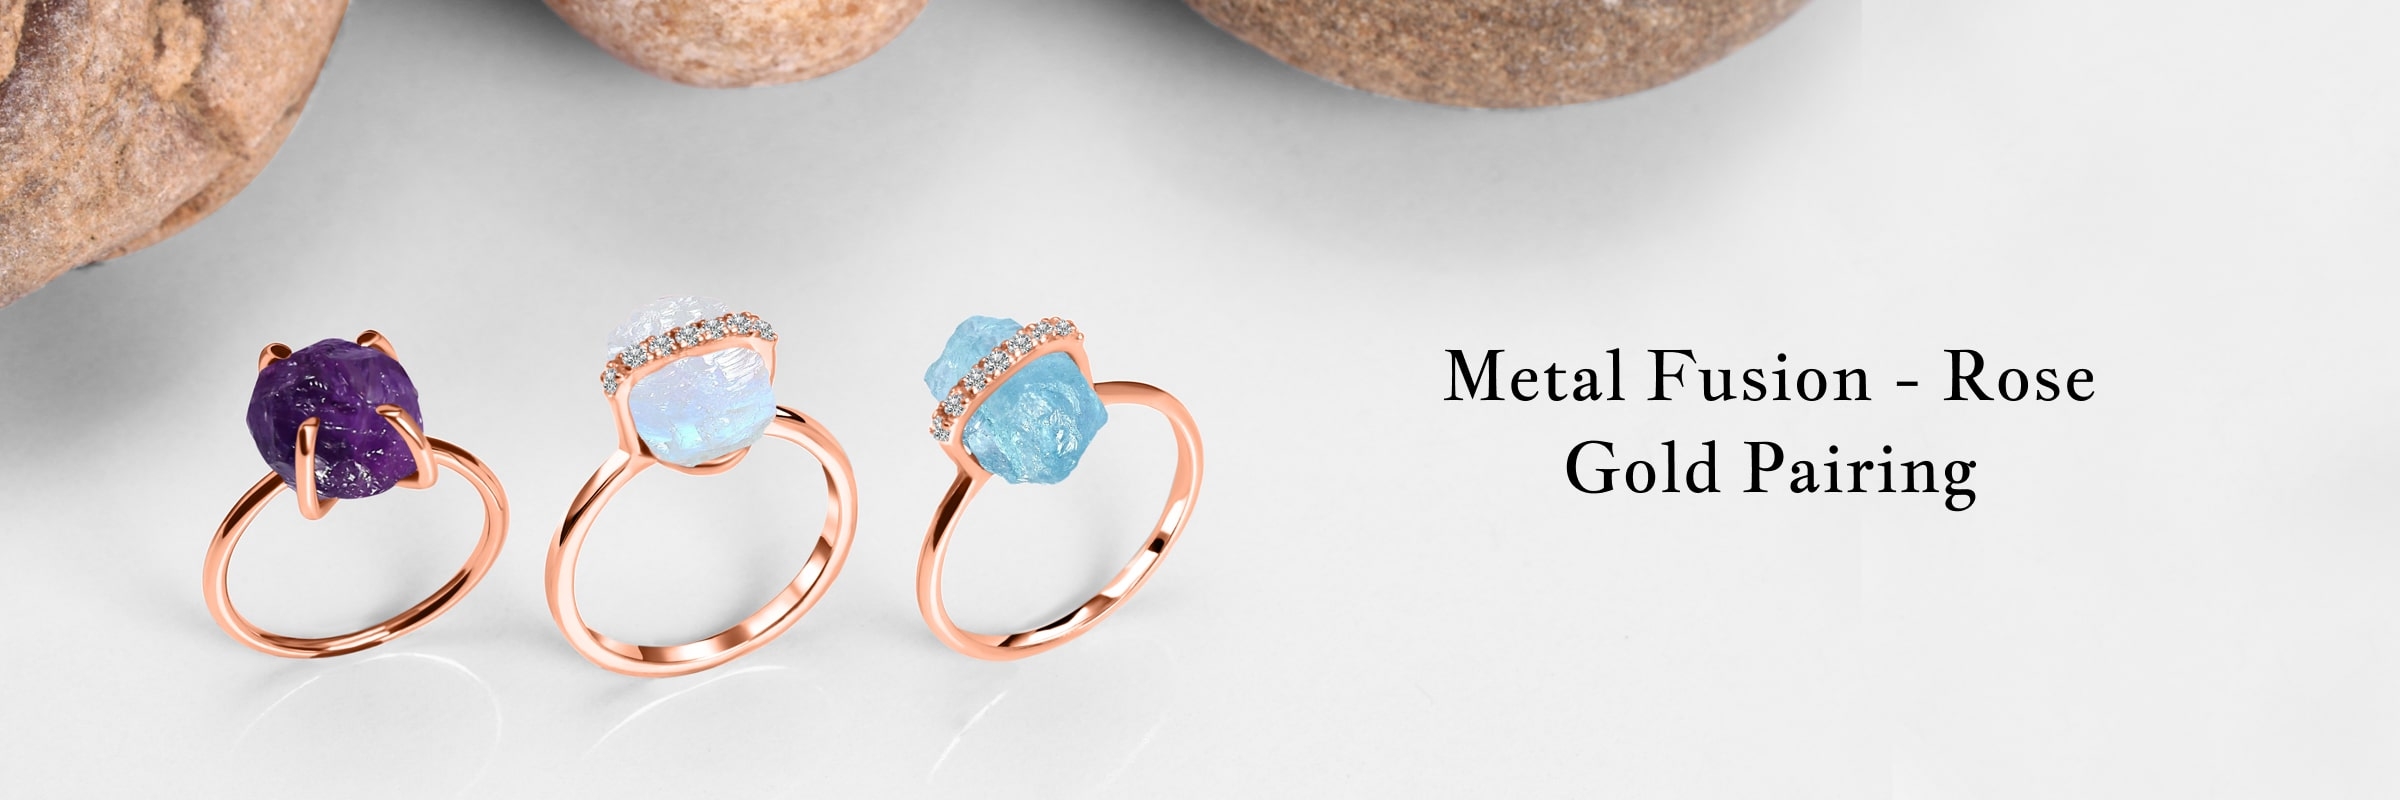 Pairing Rose Gold With Other Metals